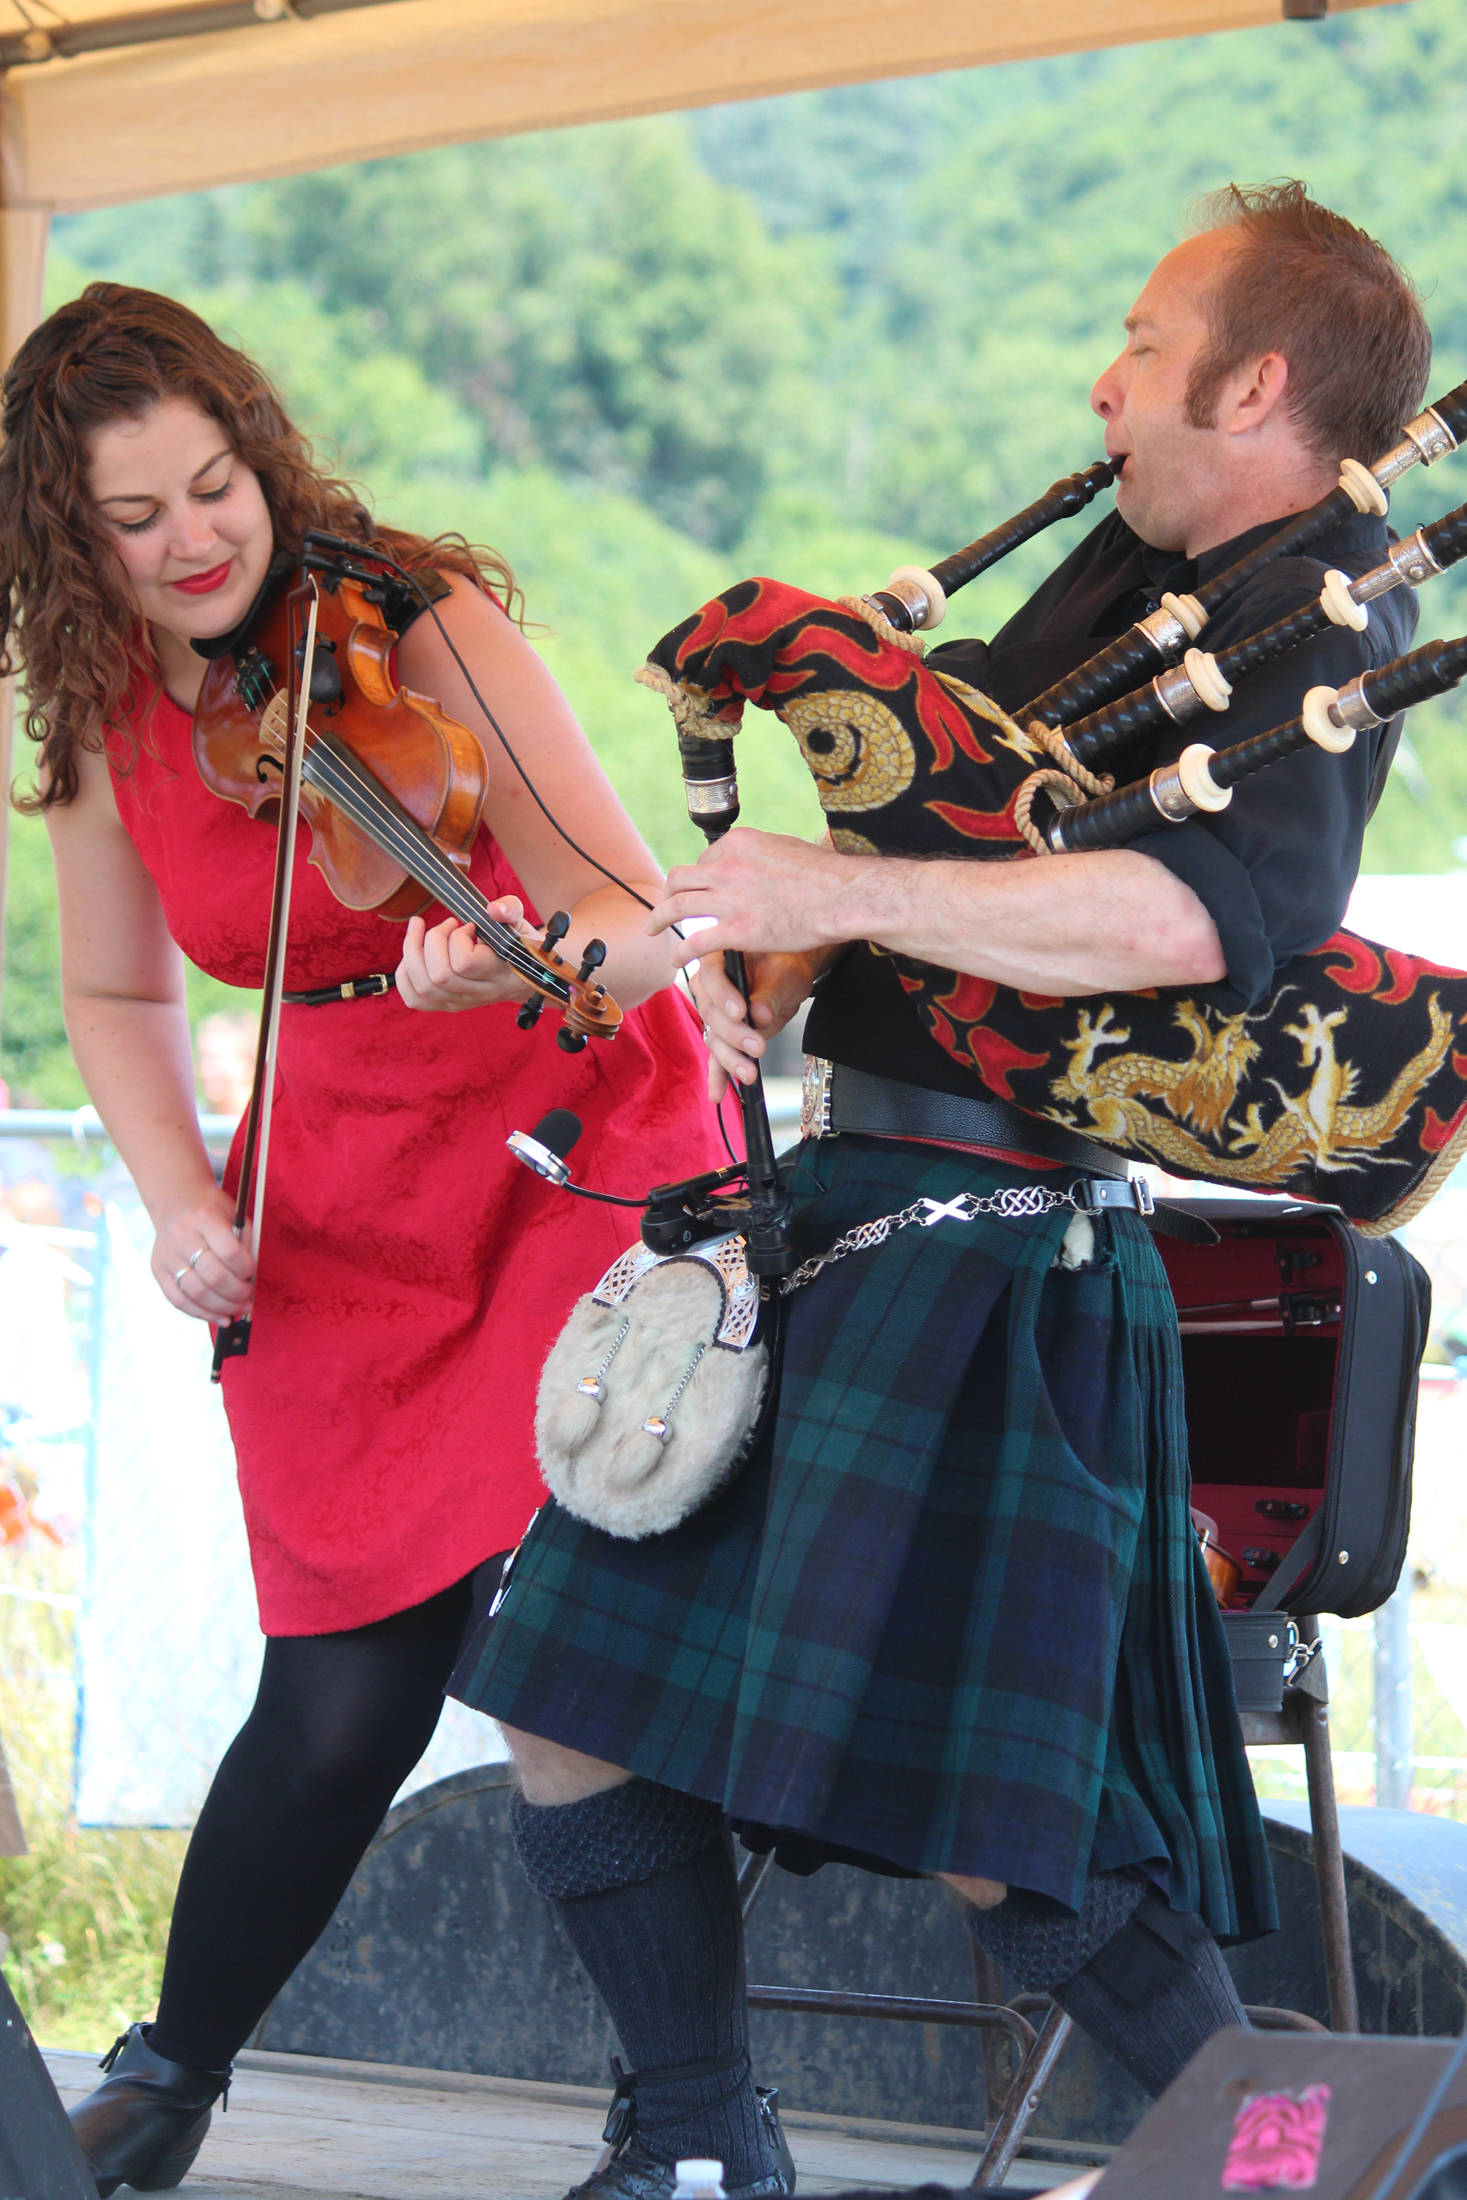 Rebecca Lomnicky and David Brewer of the Scottish music band The Fire perform along with bandmate Adam Hendey for the annual Kachemak Bay Highland Games on Saturday, July 6 2019 at Karen Hornaday Park in Homer, Alaska. (Photo by Megan Pacer/Homer News)